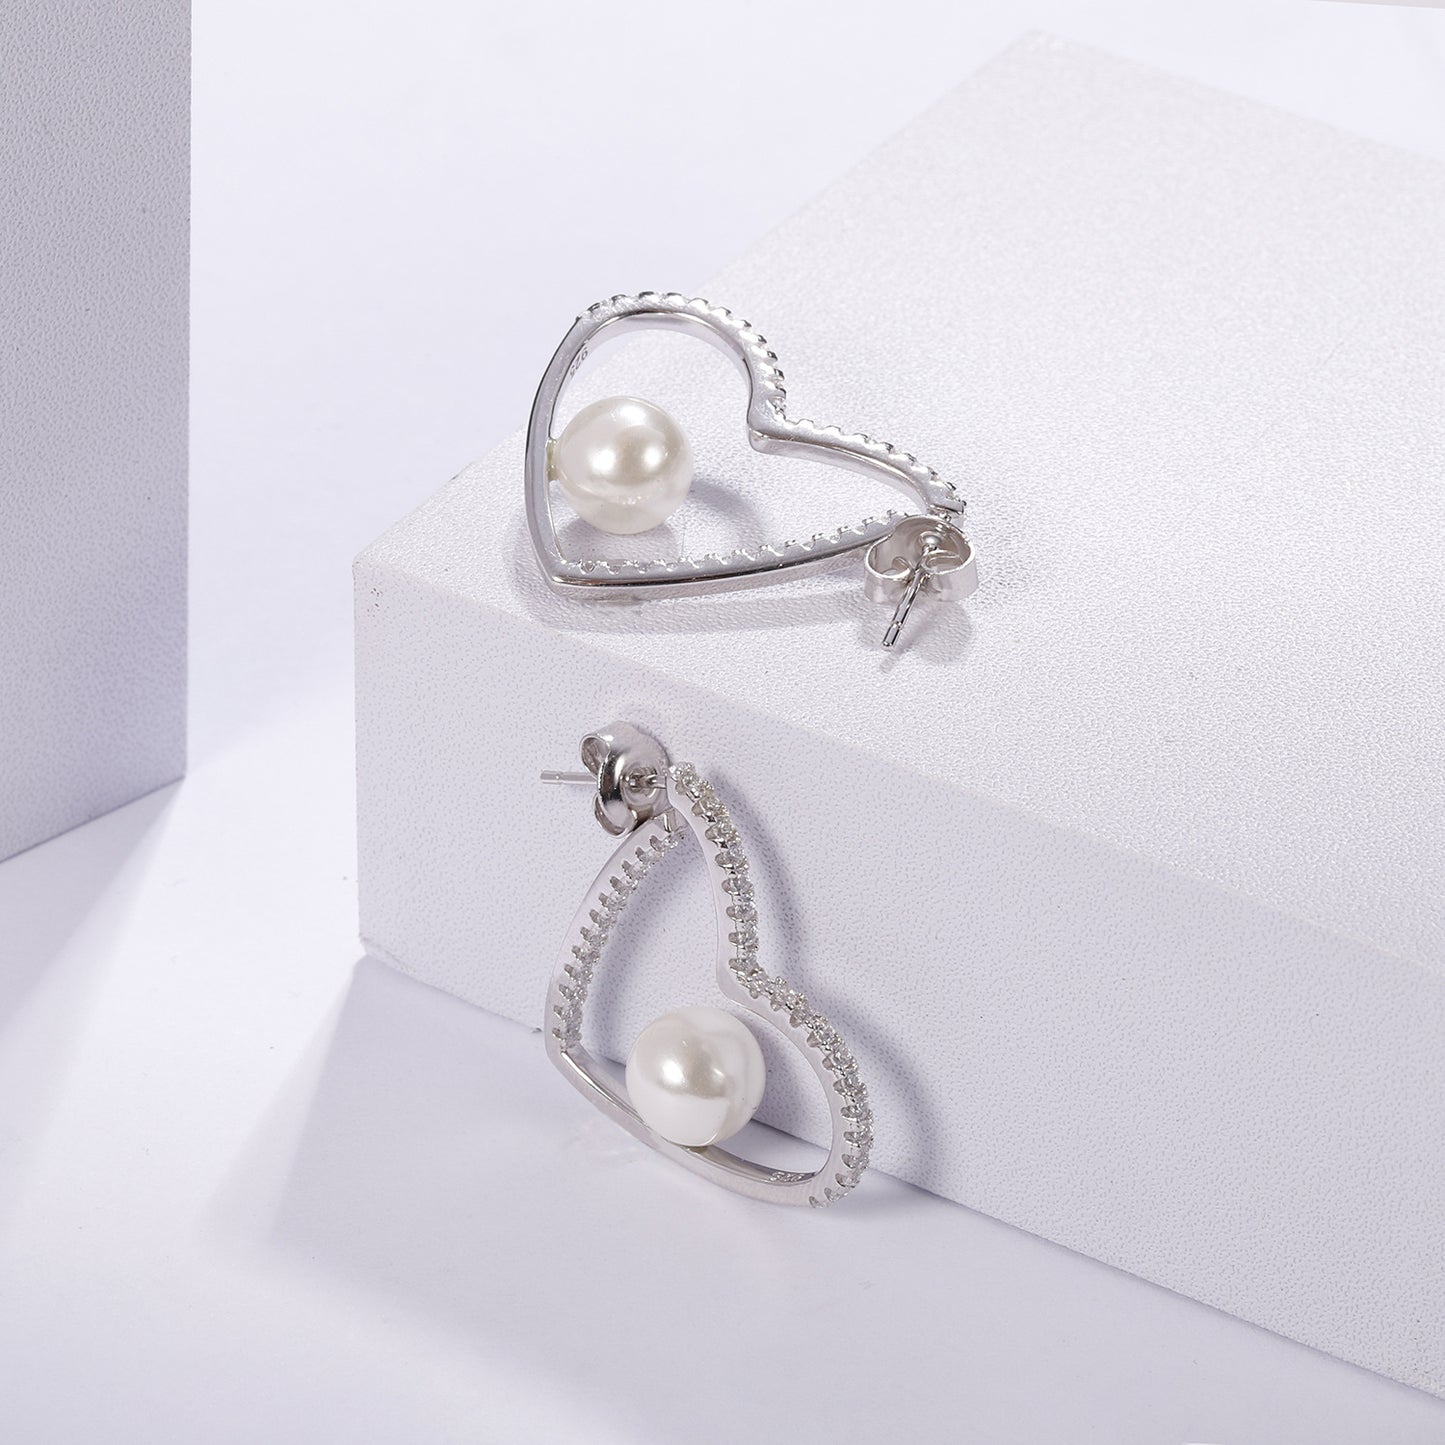 Love Shape with Natural Fresh Water Pearl Silver Studs Earrings for Women